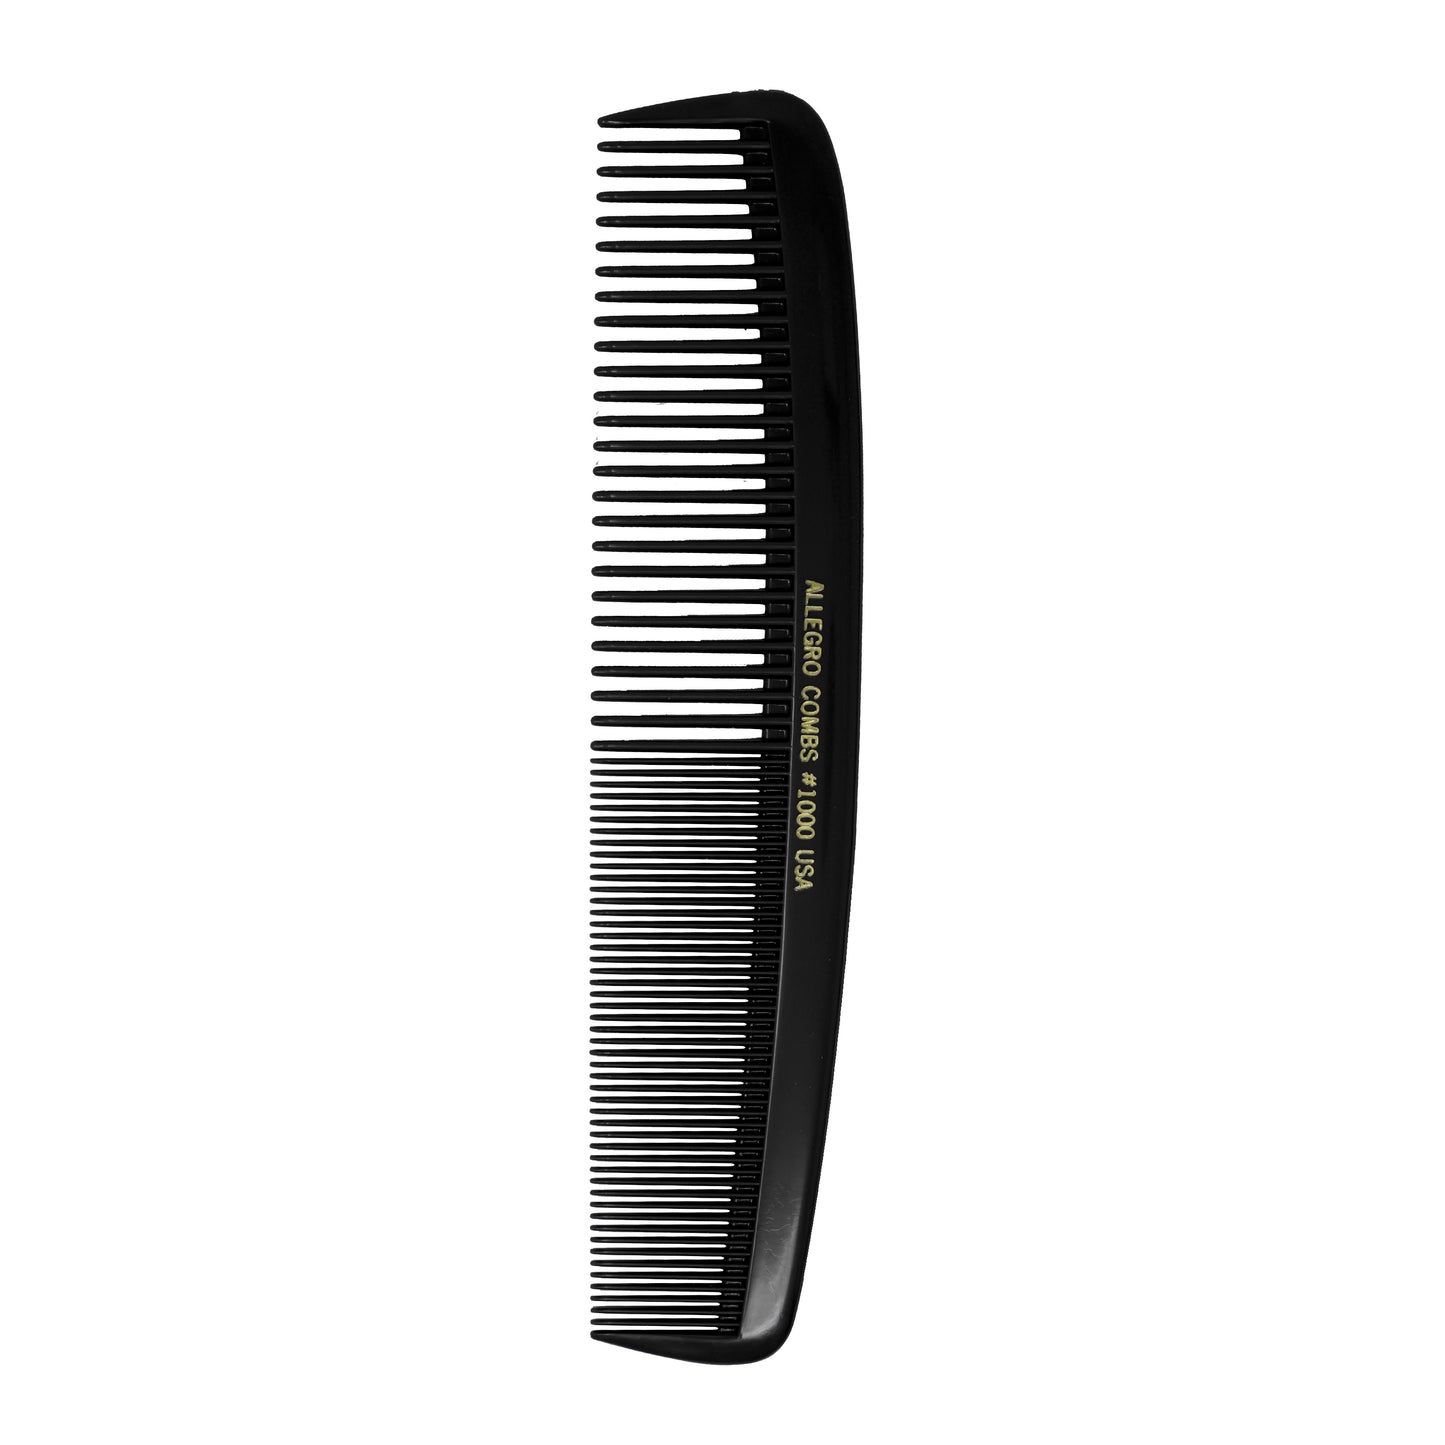 Allegro Combs 1000 X-Large Styling Comb Hair Cutting Barber Stylist Combs All Purpose Wide And Fine Tooth 1 Unit